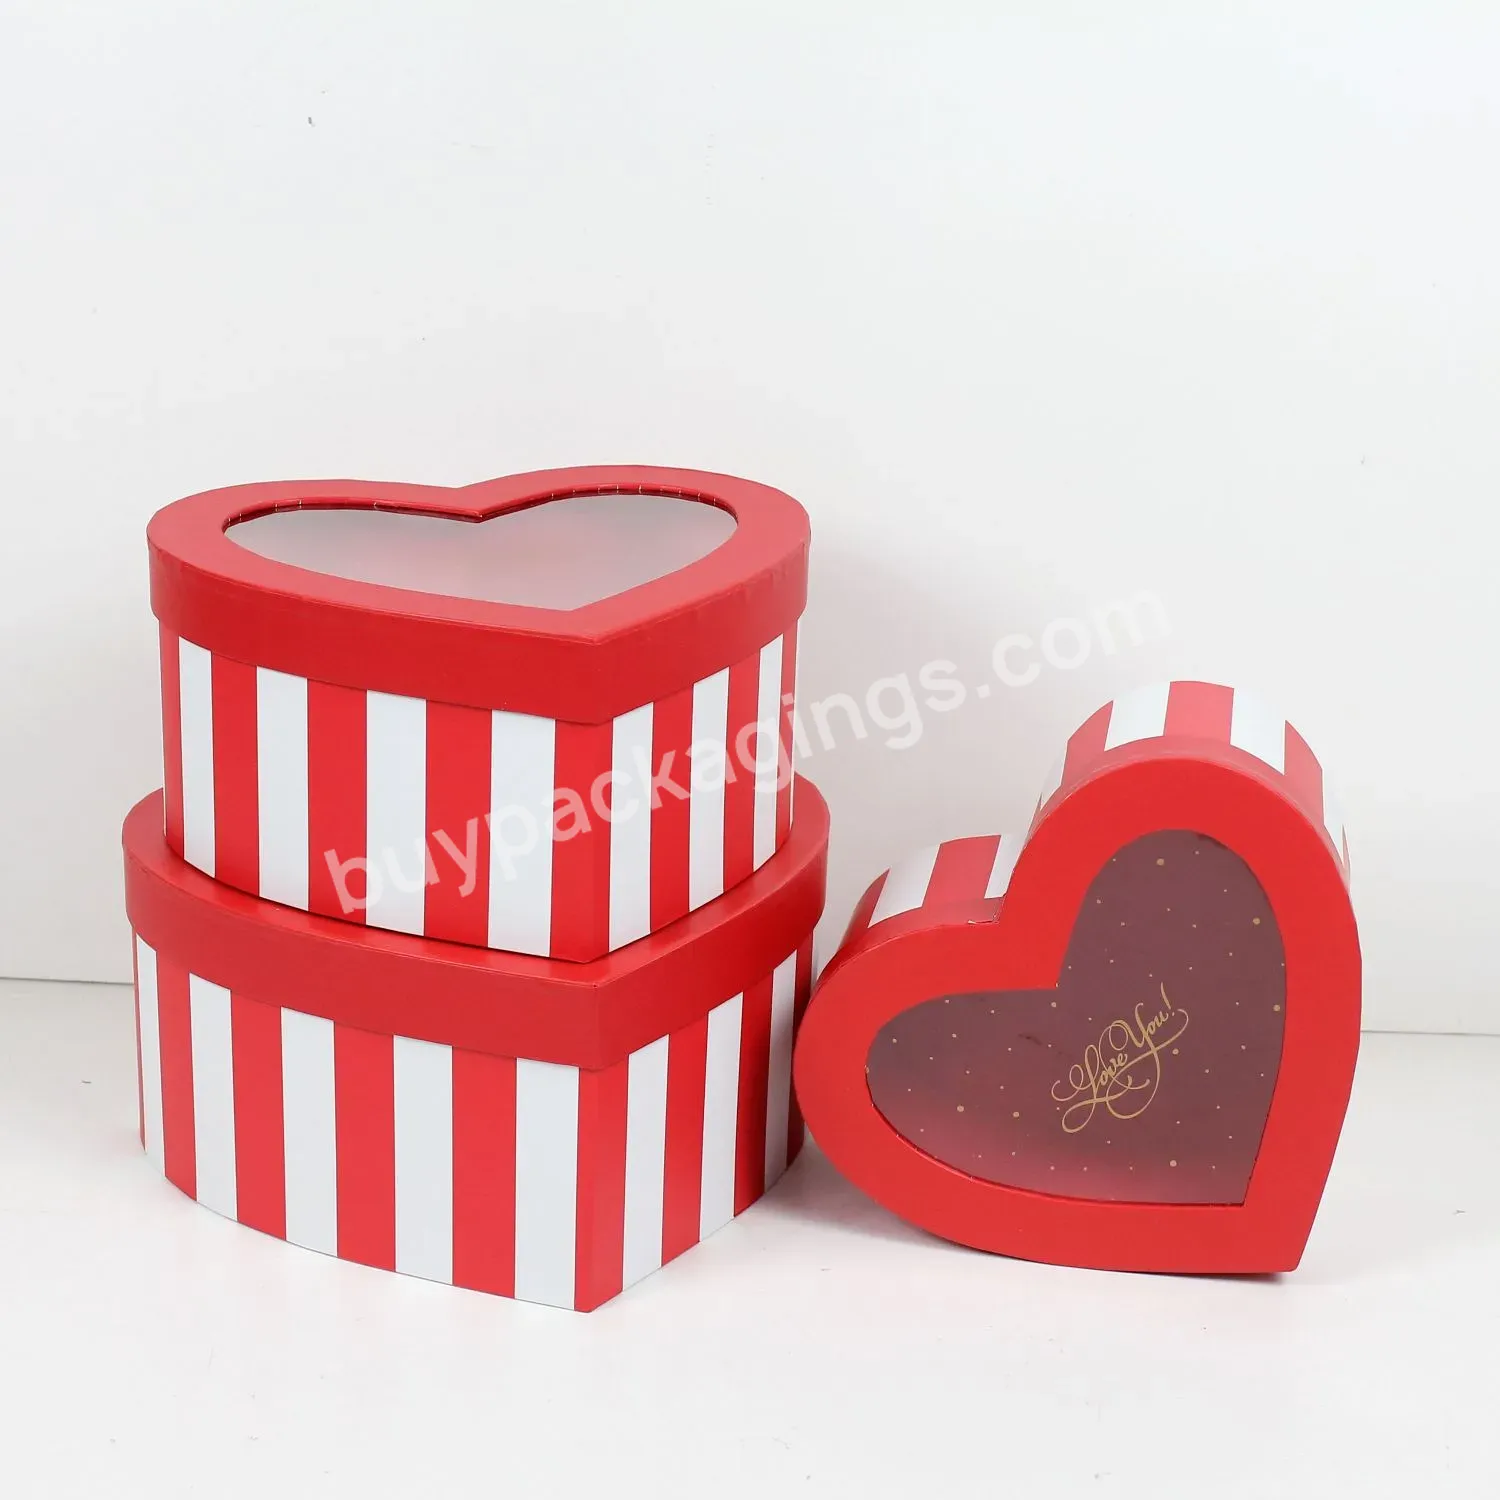 Wholesale Heart Shaped Flower Gift Box Clear Pvc Window Paper Box With Striped Pattern Printed - Buy Heart Shaped Flower Gift Box,Clear Pvc Window Paper Box,Paper Box With Striped Pattern Printed.